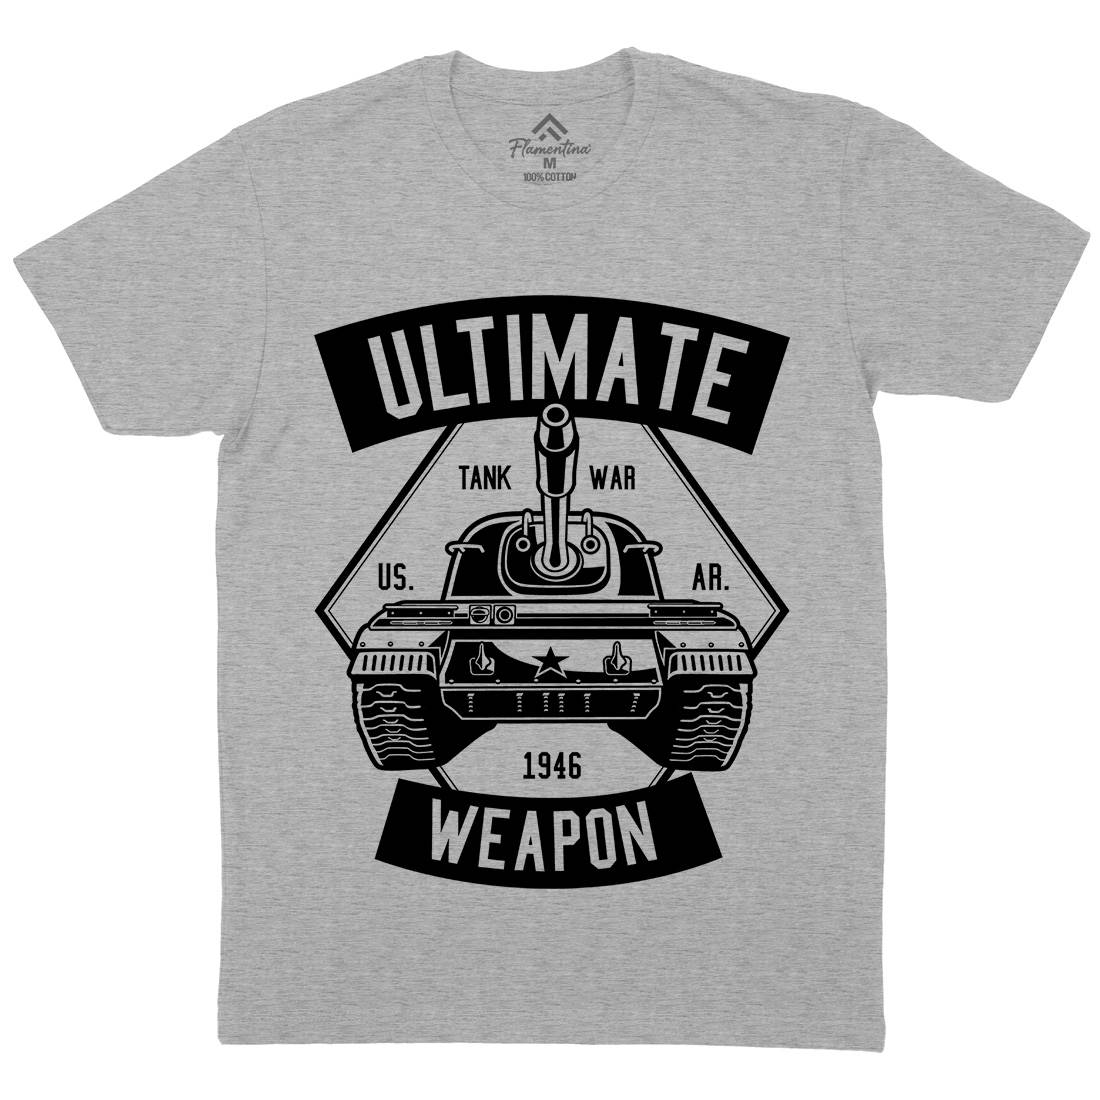 Tank War Ultimate Weapon Mens Crew Neck T-Shirt Army B649